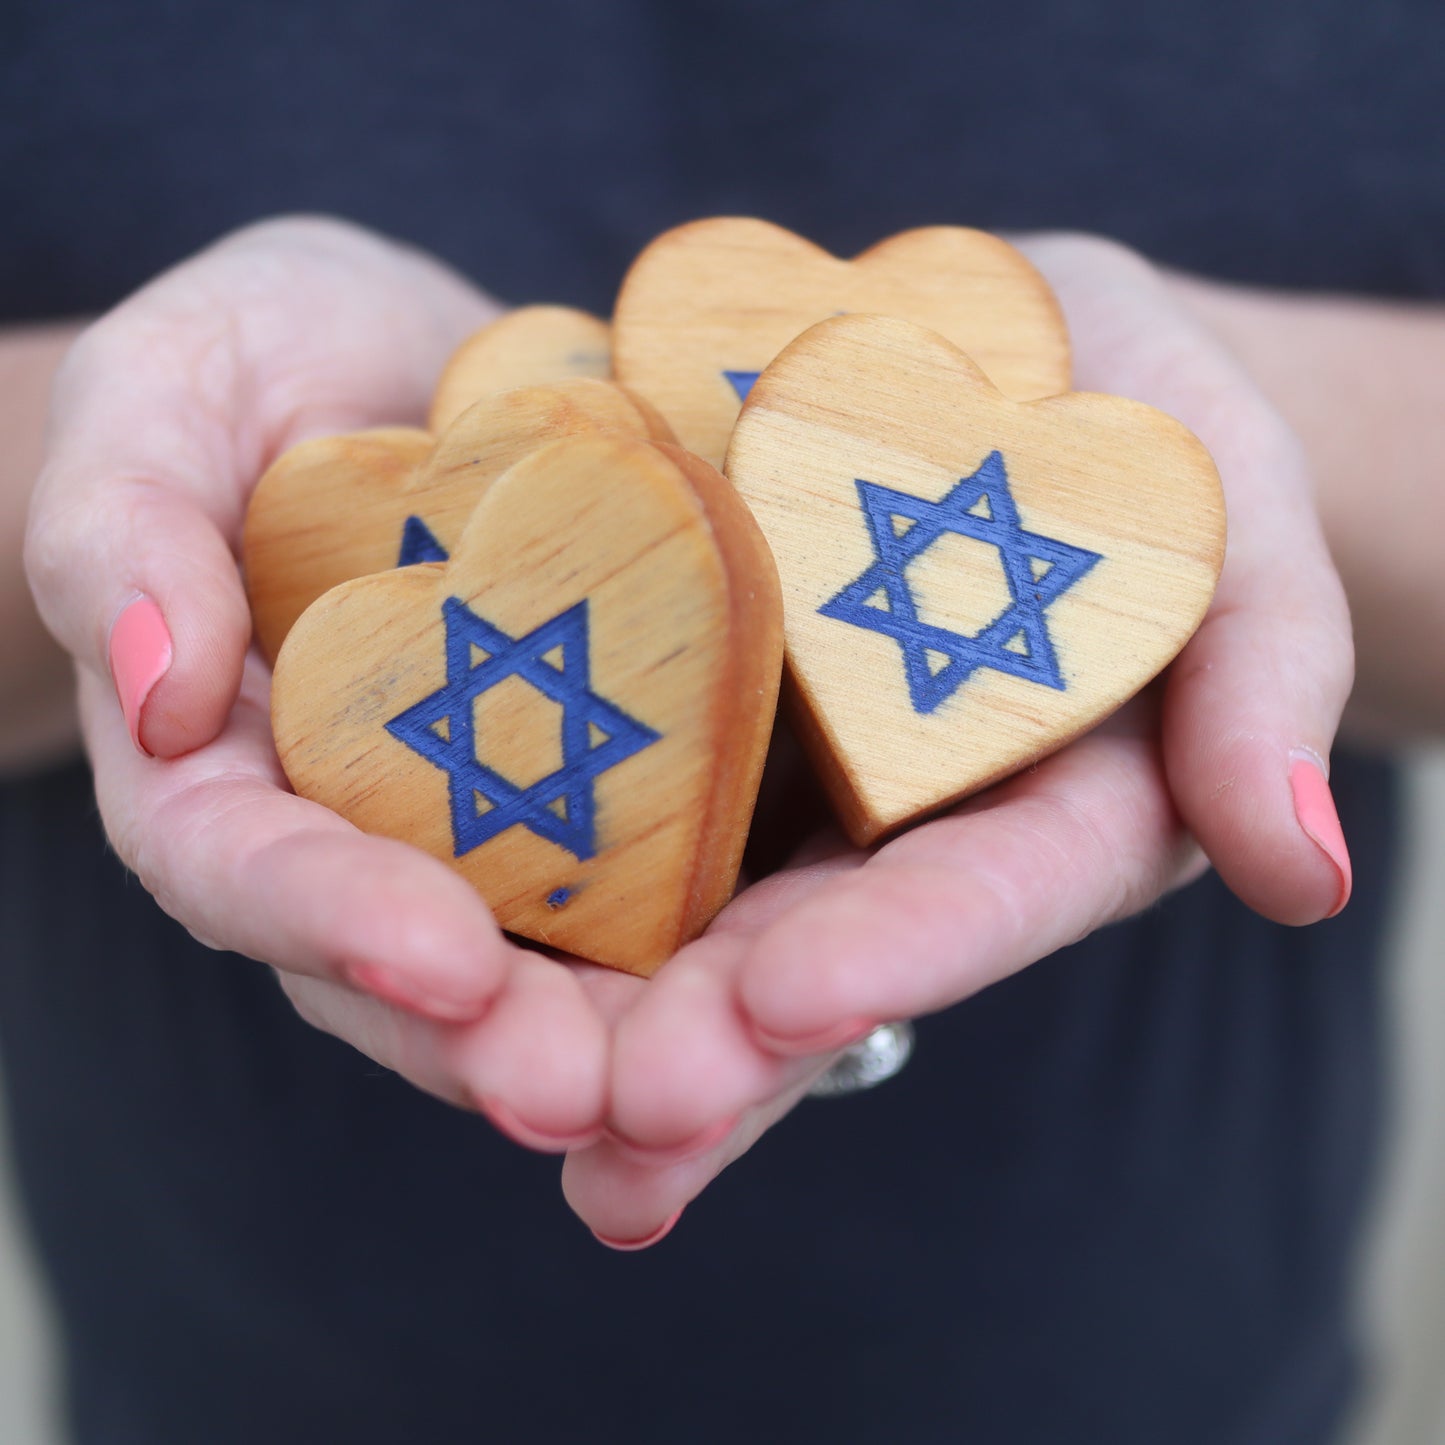 Hearts for Peace in Israel